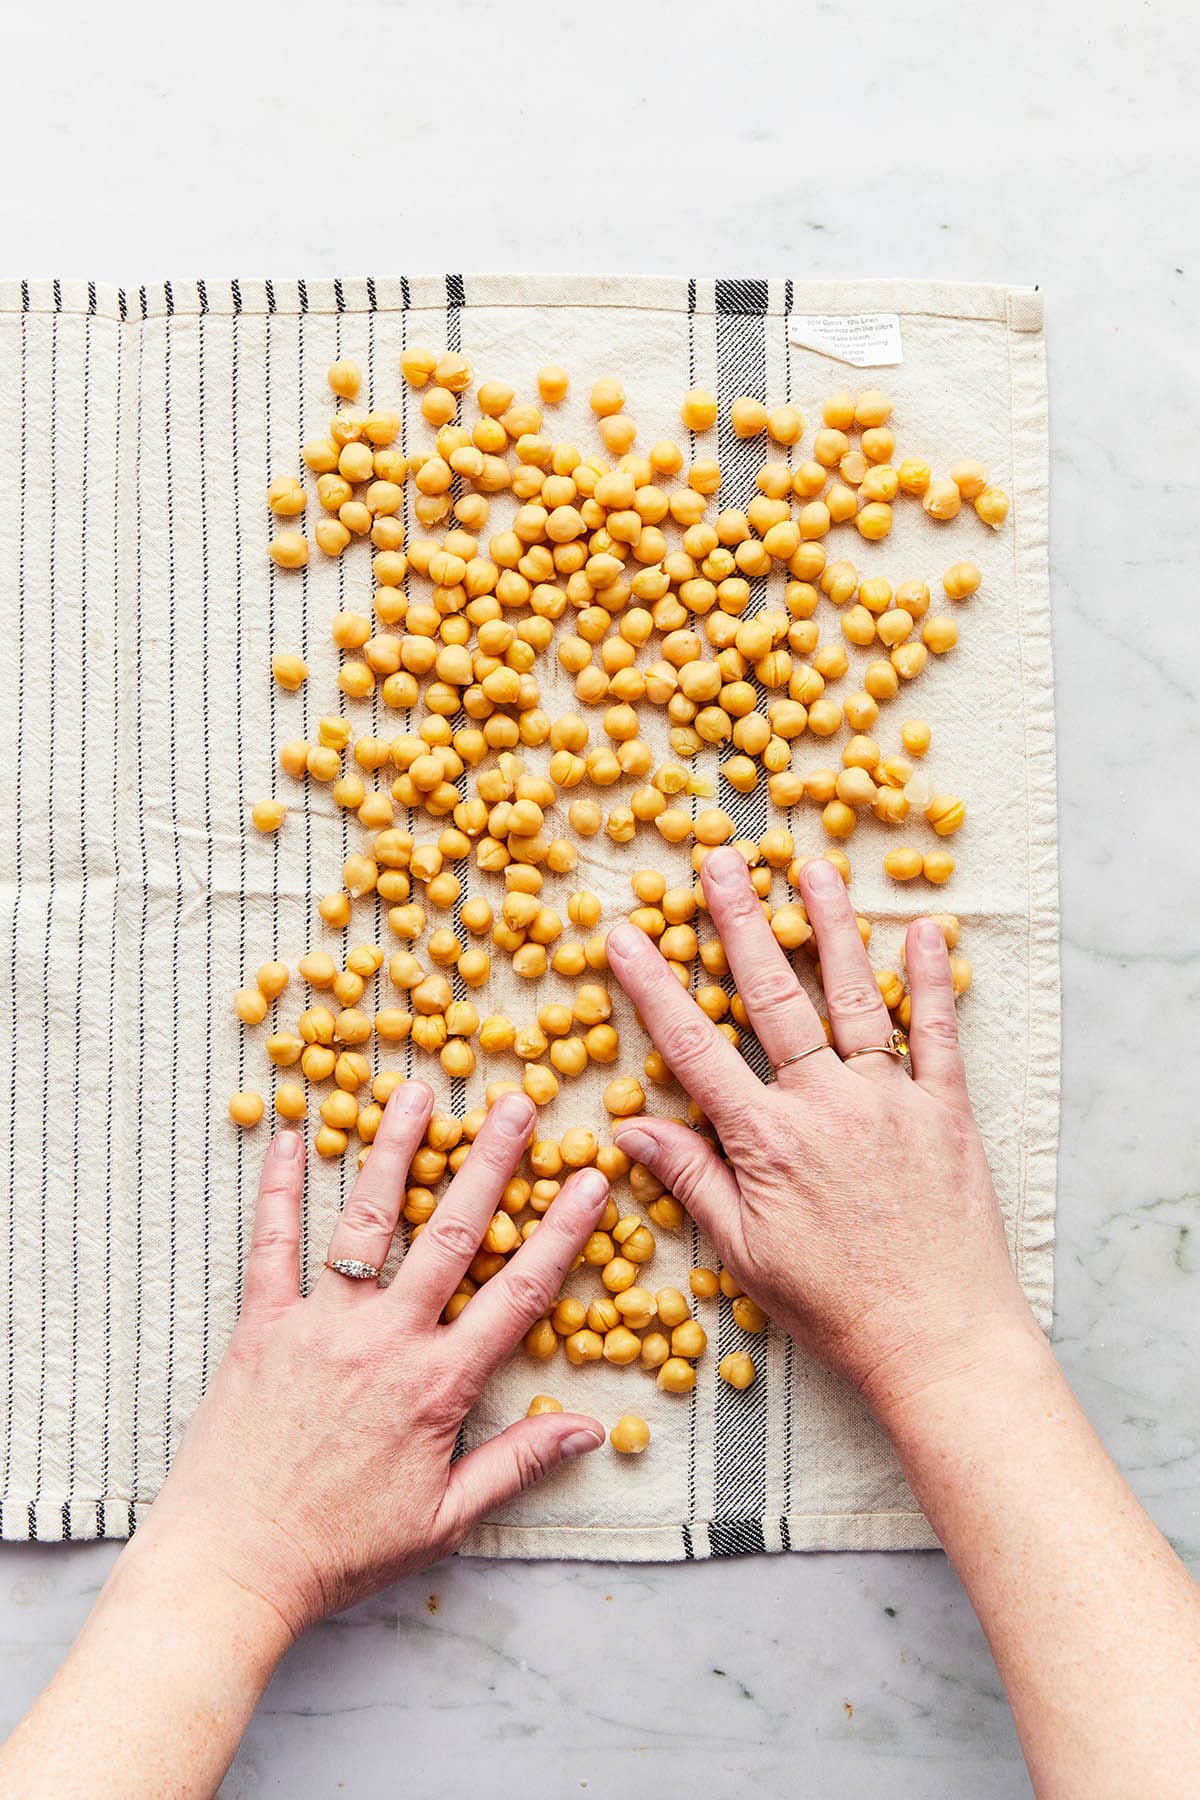 Hands spreading chickpeas evenly over one half of a spread out tea towel.